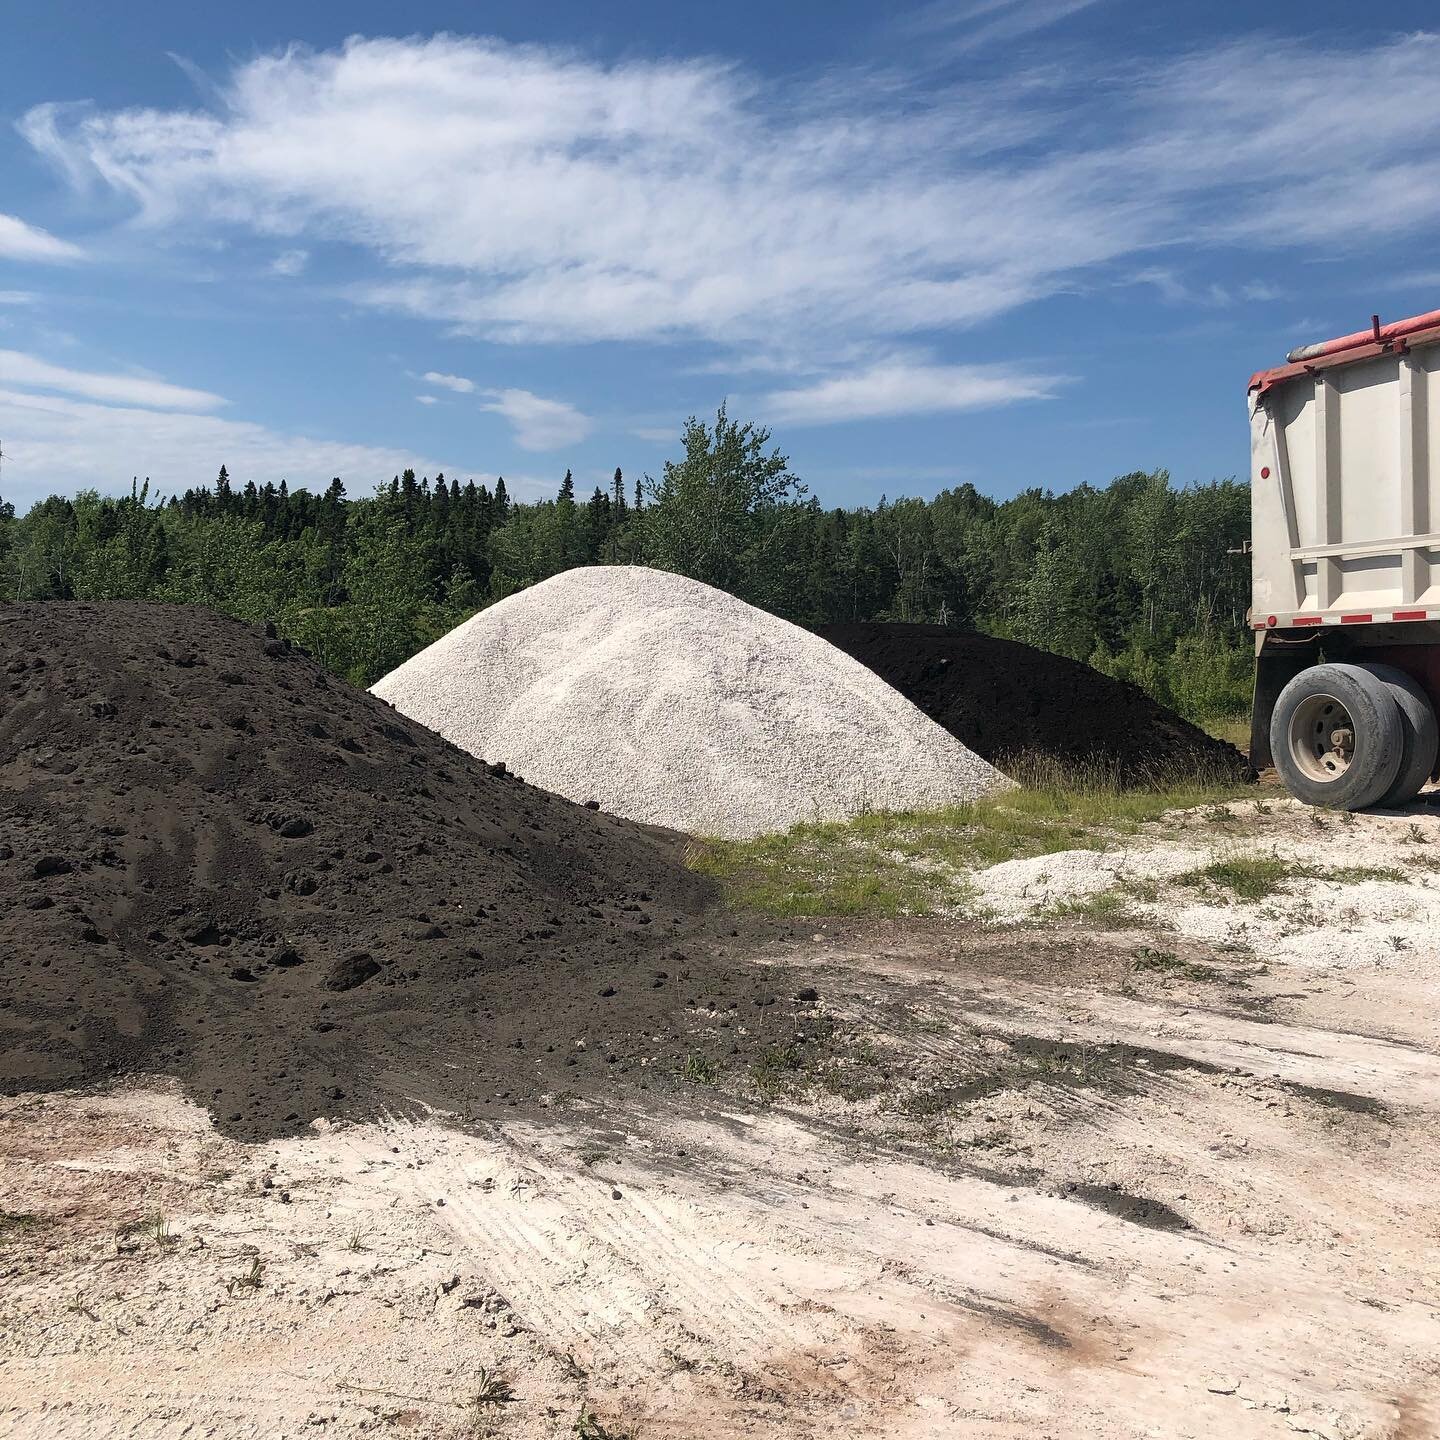 Sneak peak for Thursday #blueberry field tour! @jdirvinglimited wood ash, @HalifaxCDRecycl gypsum &amp; @pcwastemgmt compost for spreading demo!